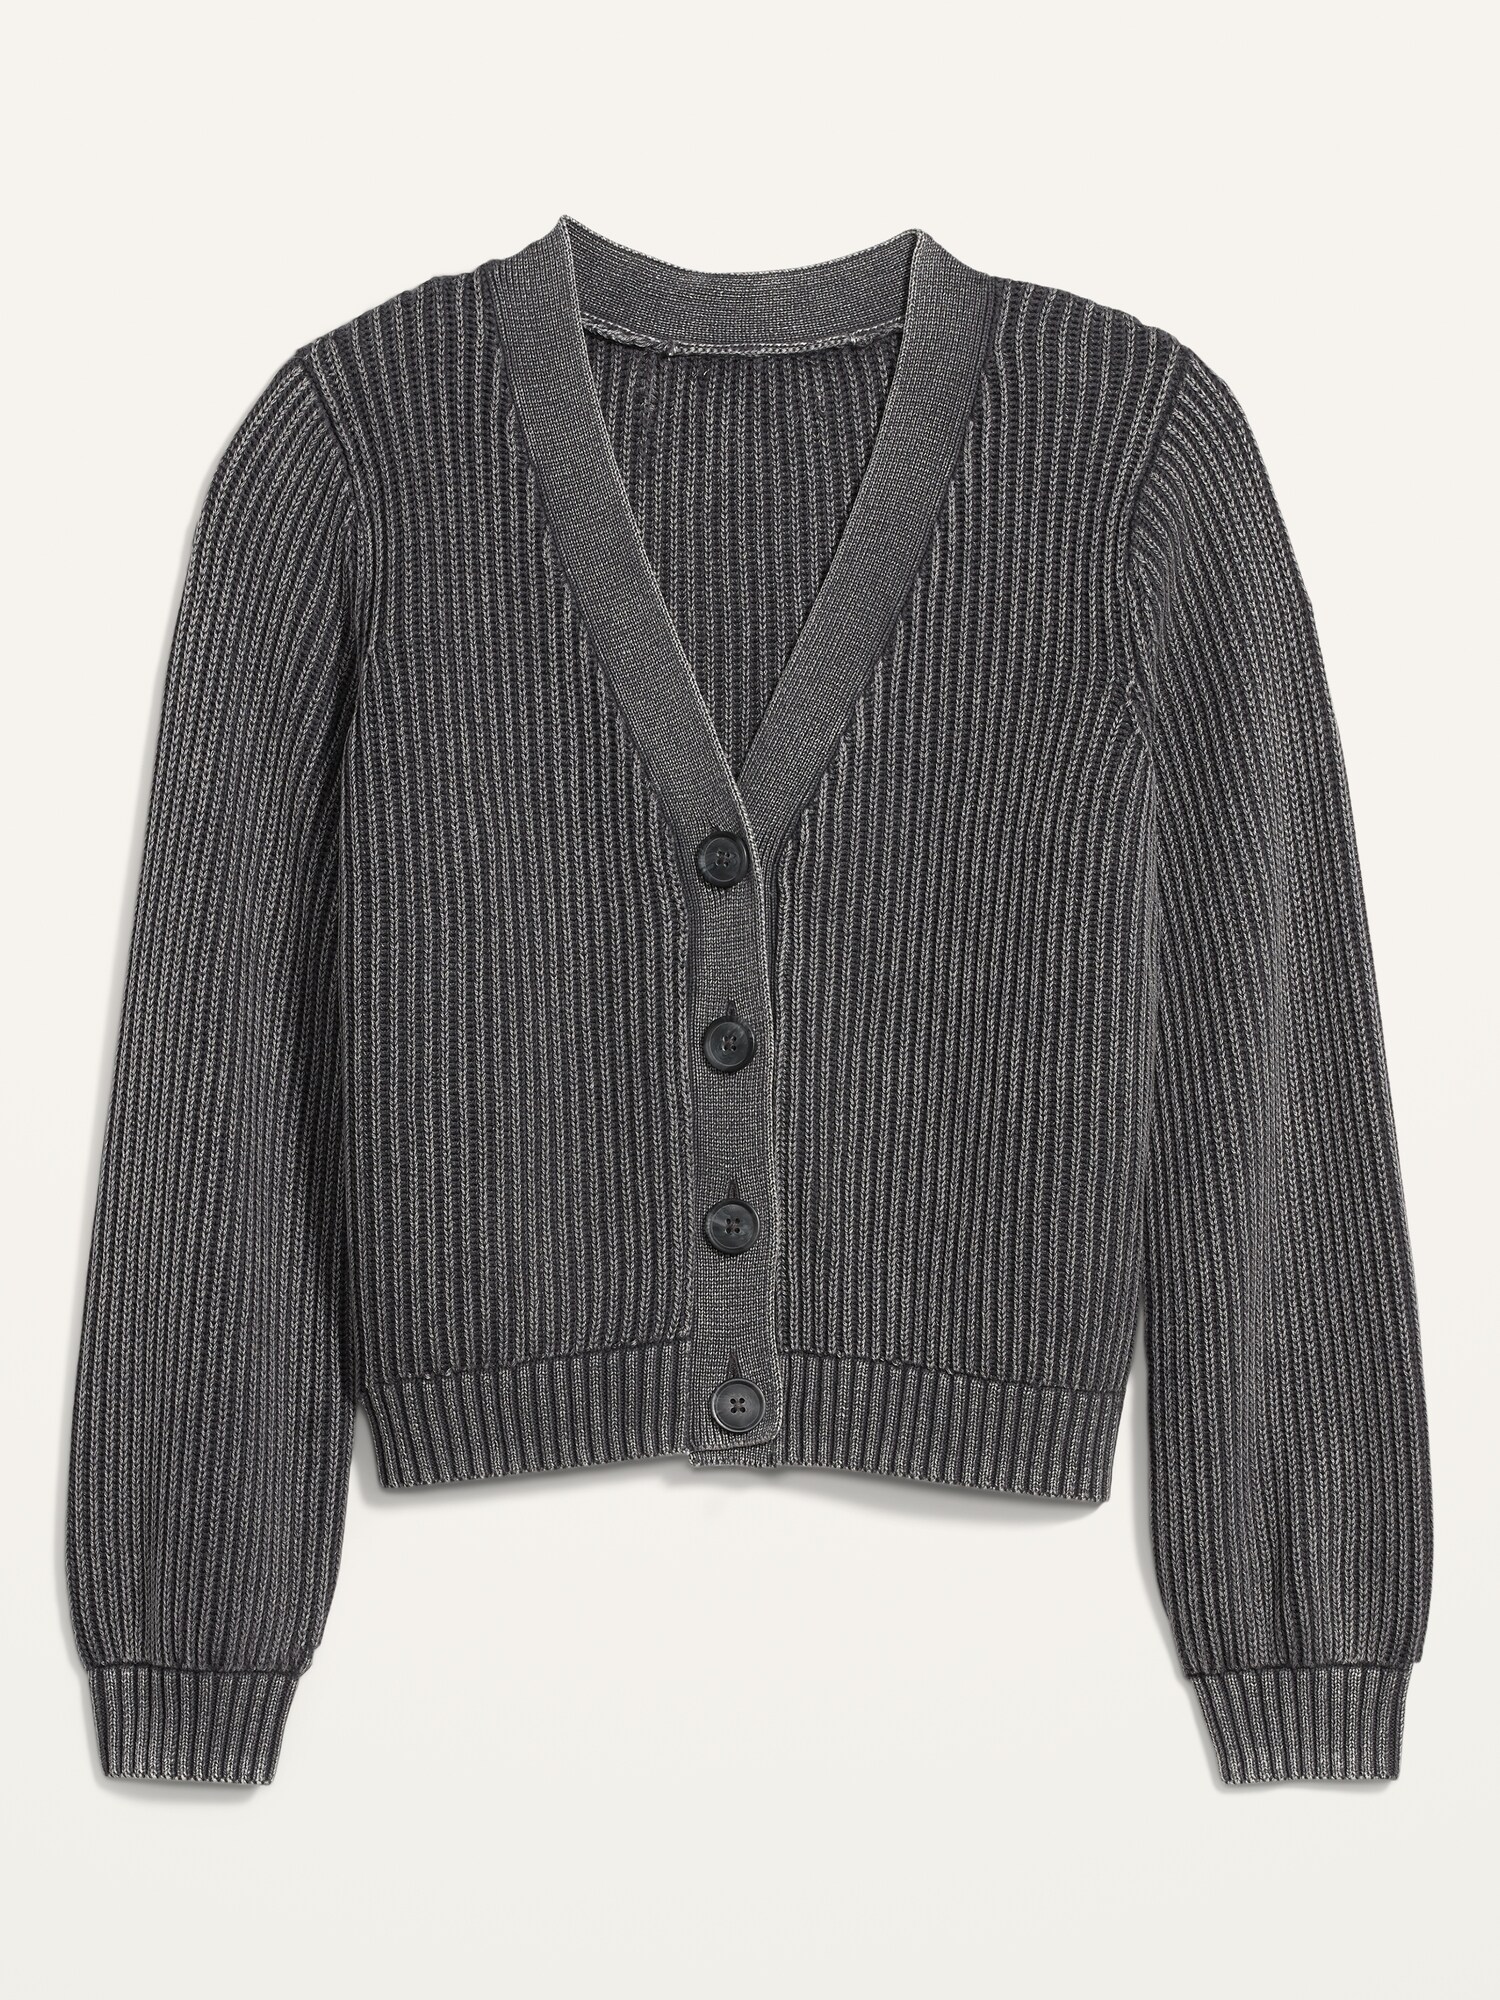 Acid-Wash Shaker-Stitch Button-Front Cardigan Sweater for Women | Old Navy